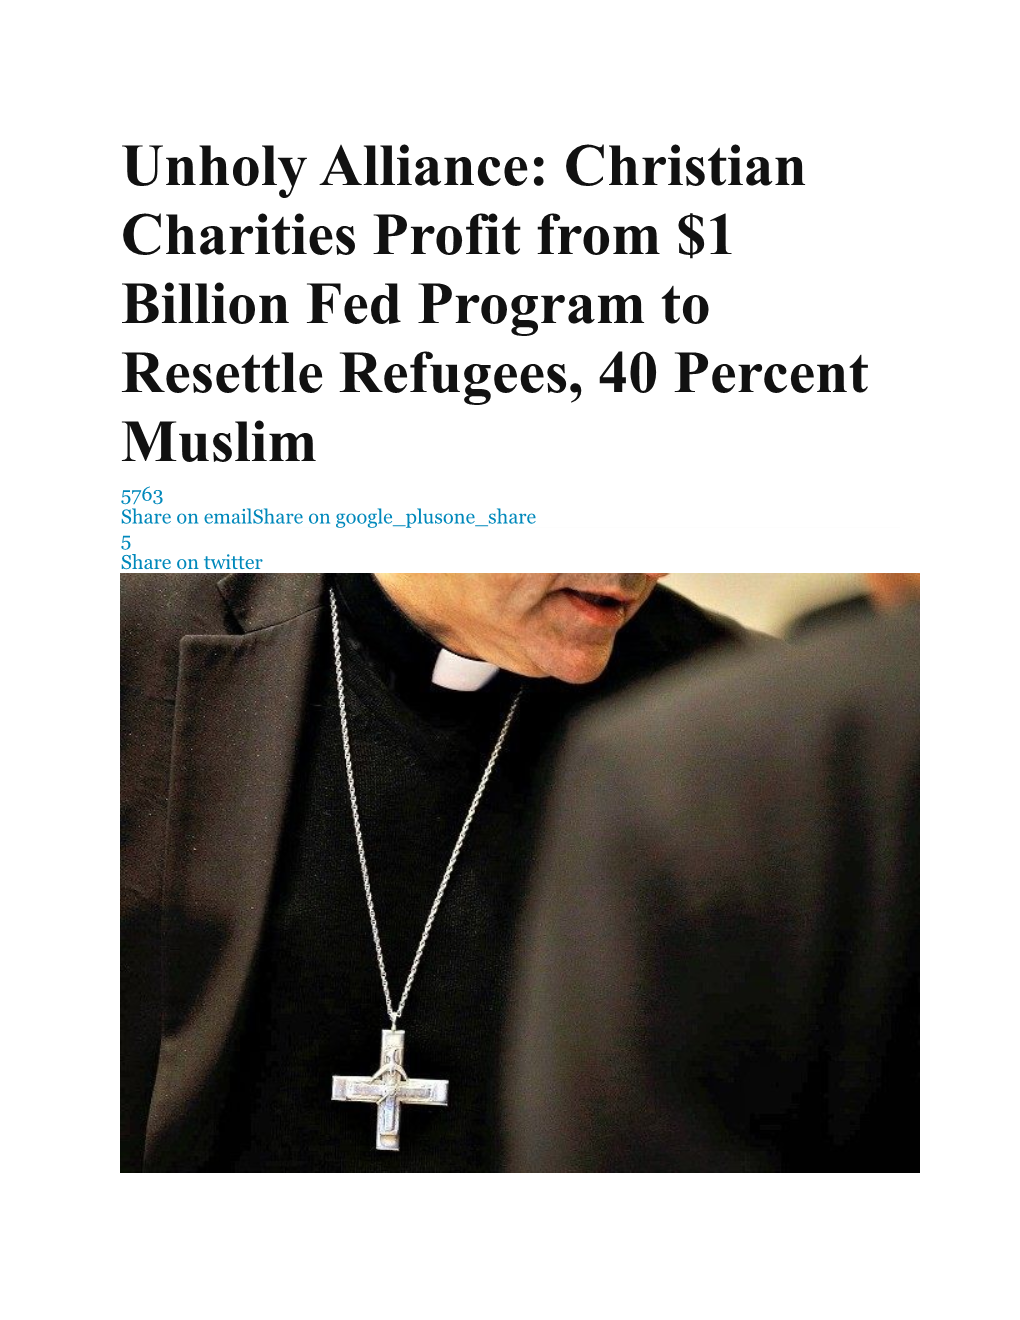 Unholy Alliance: Christian Charities Profit from $1 Billion Fed Program to Resettle Refugees